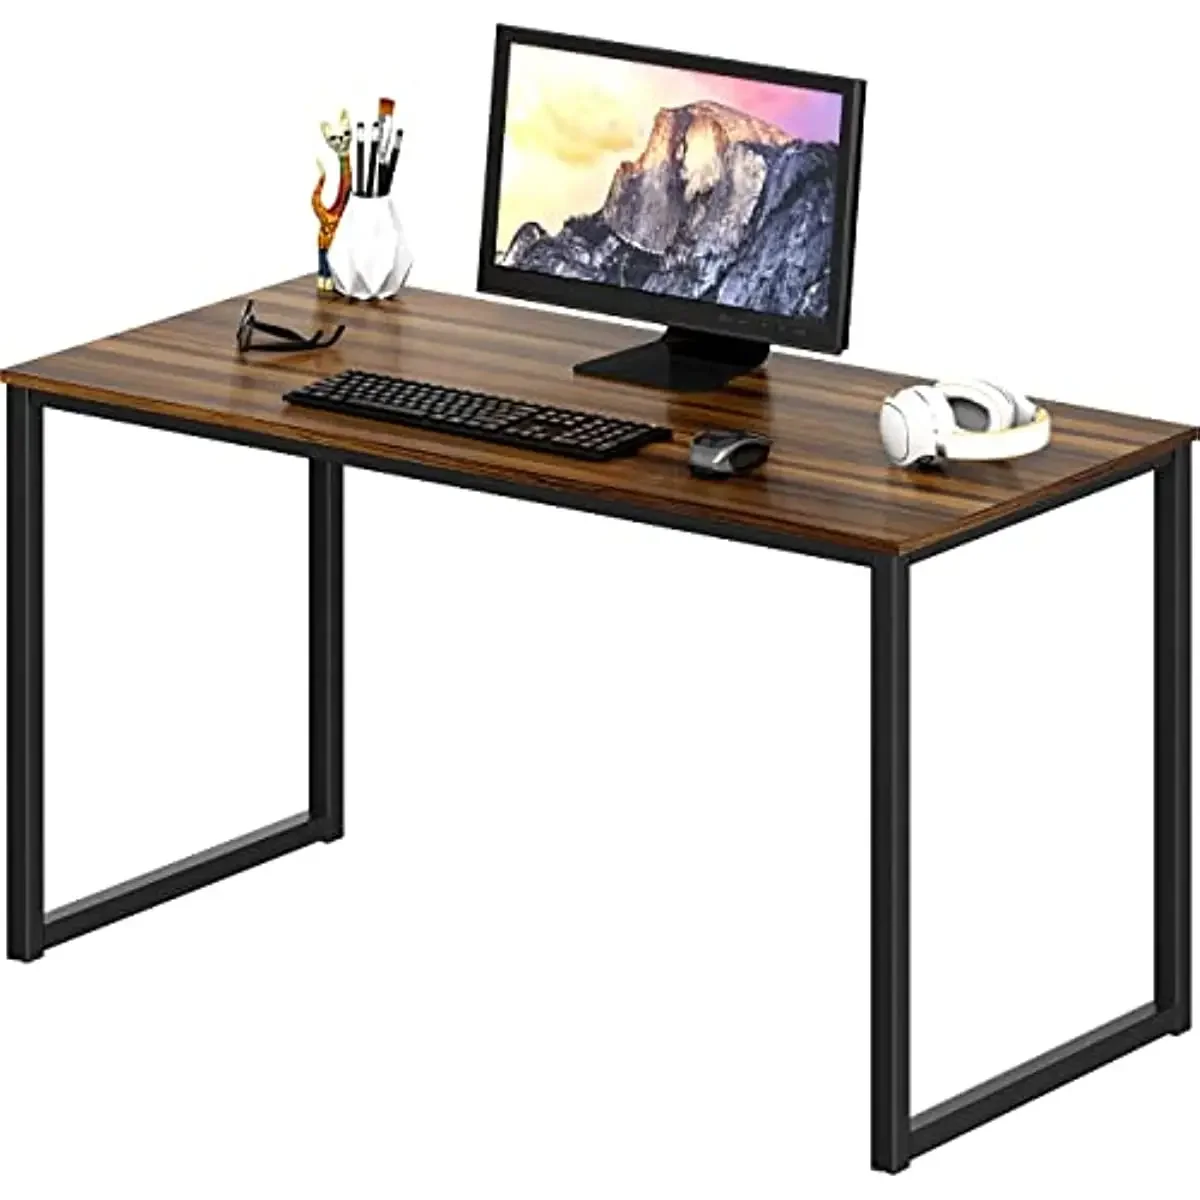 

40-Inch Computer Desk, A variety of colors such as black/white are available